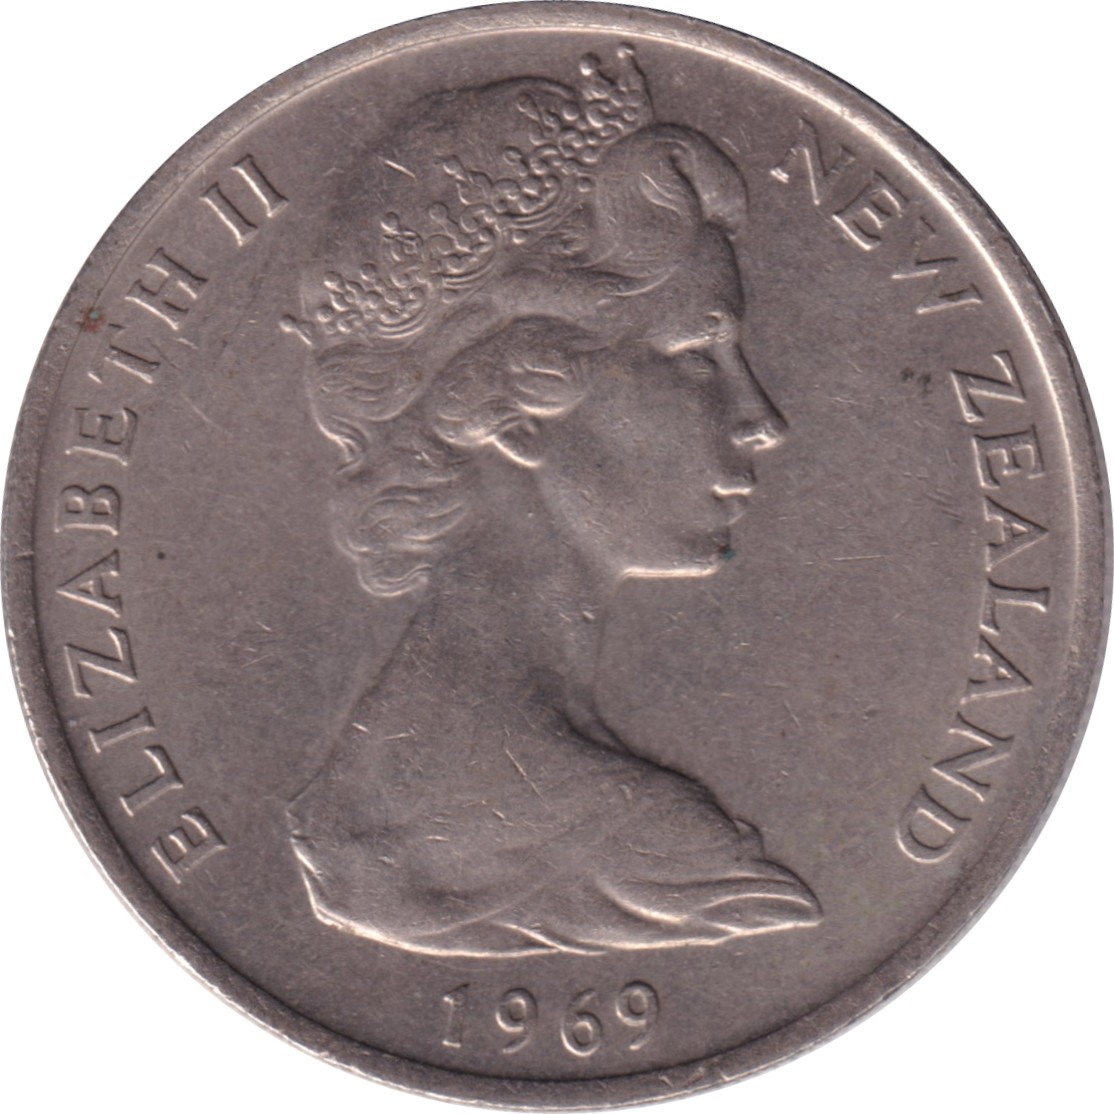 10 cents - Elizabeth II - Young bust